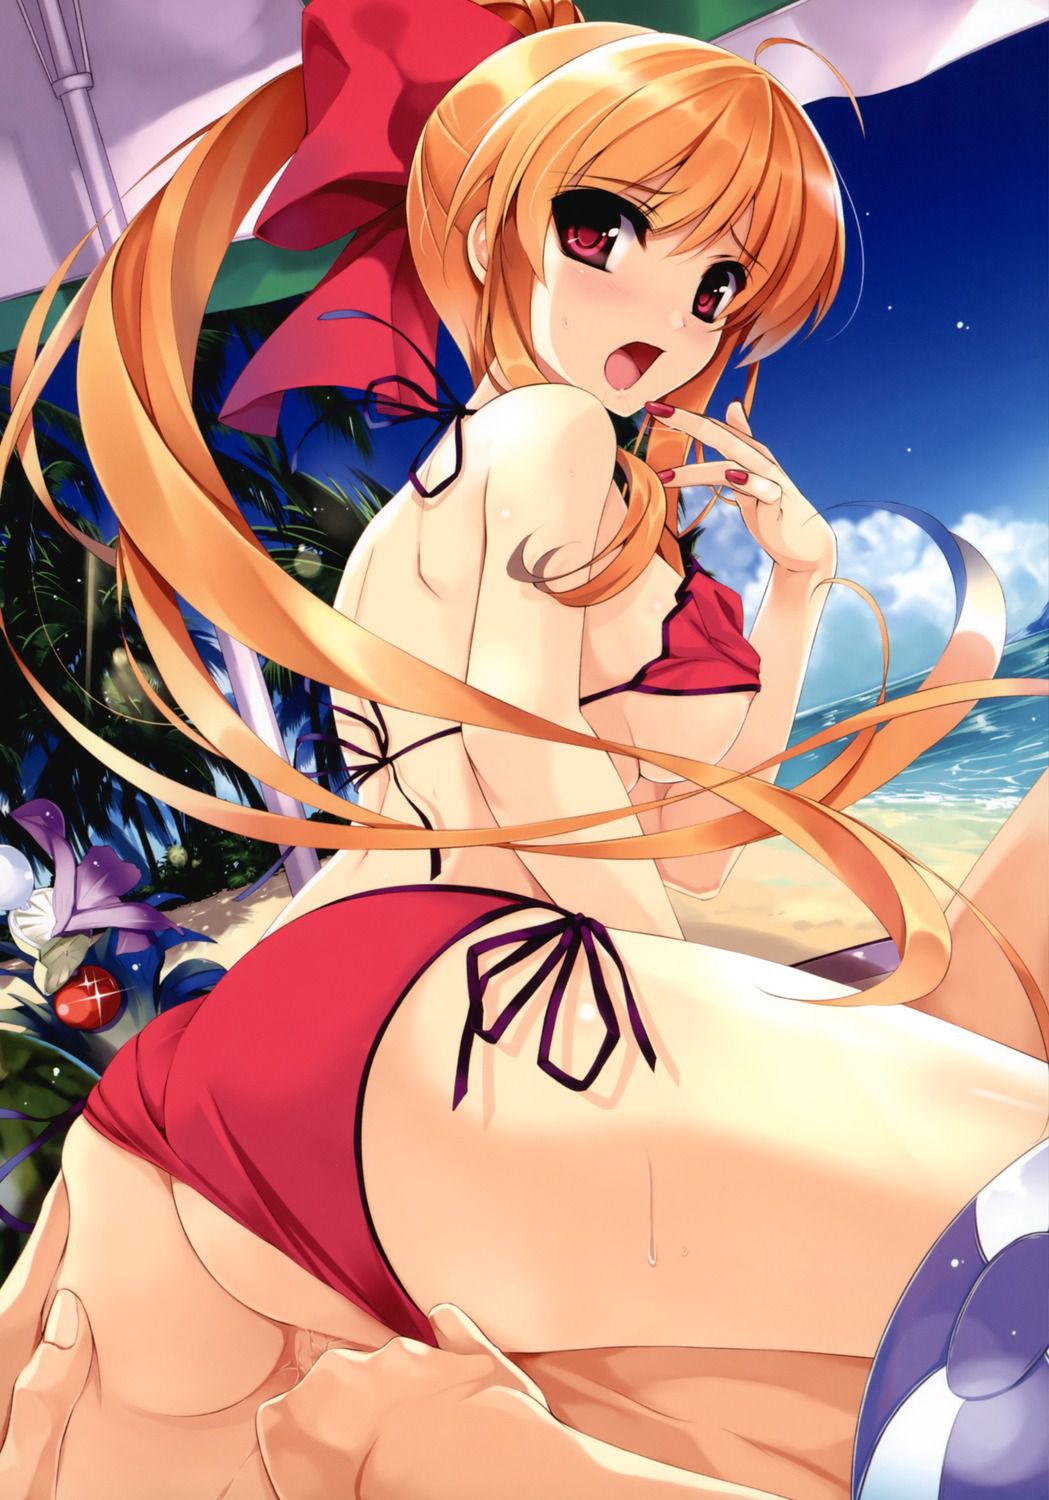 Swimsuit girl cloth area too small! I will take pictures 9